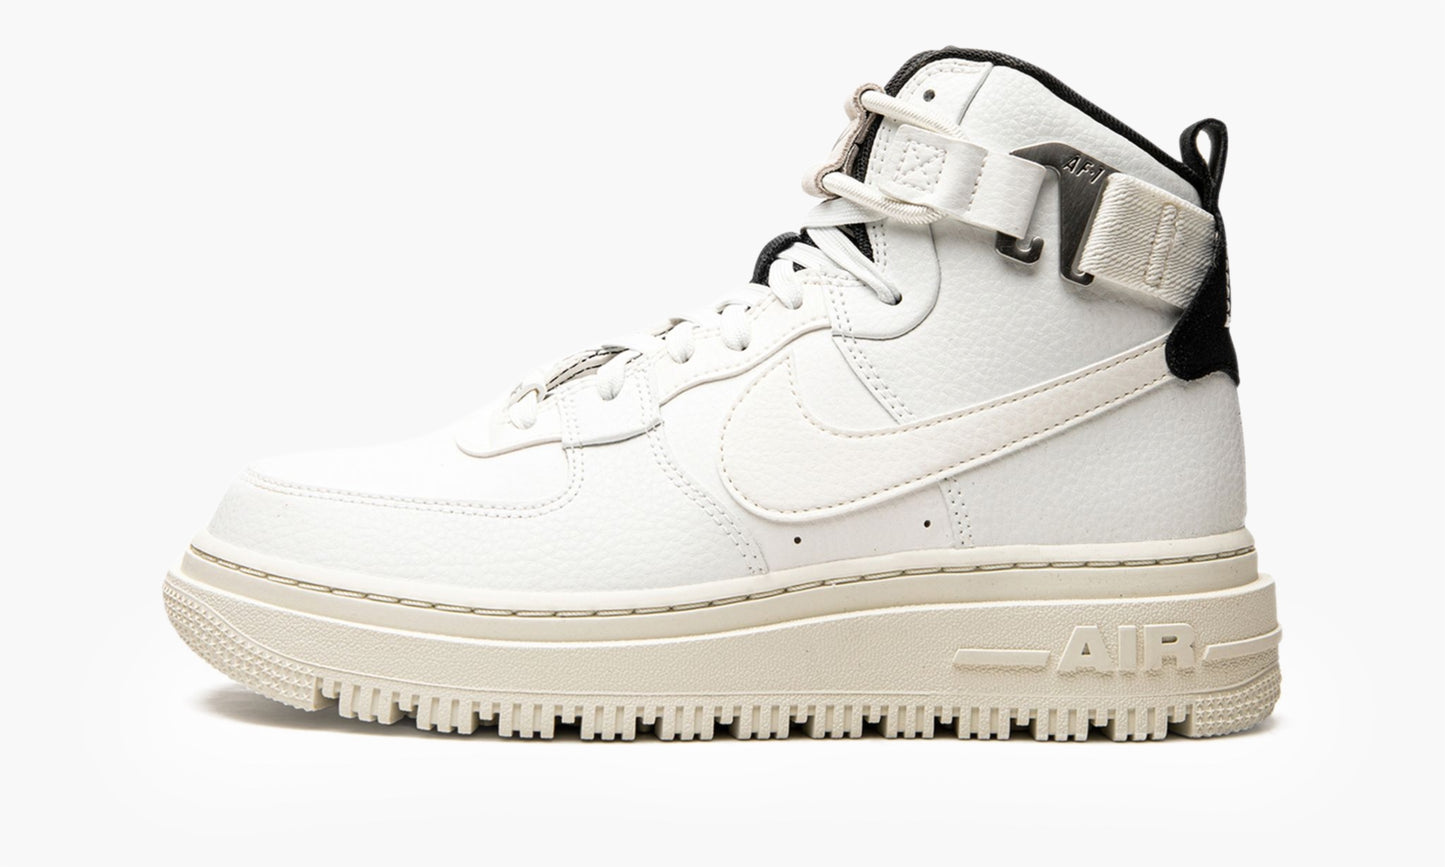 Nike Air Force 1 High WMNS Utility 2.0 Summit White - DC3584 100 | The Sortage